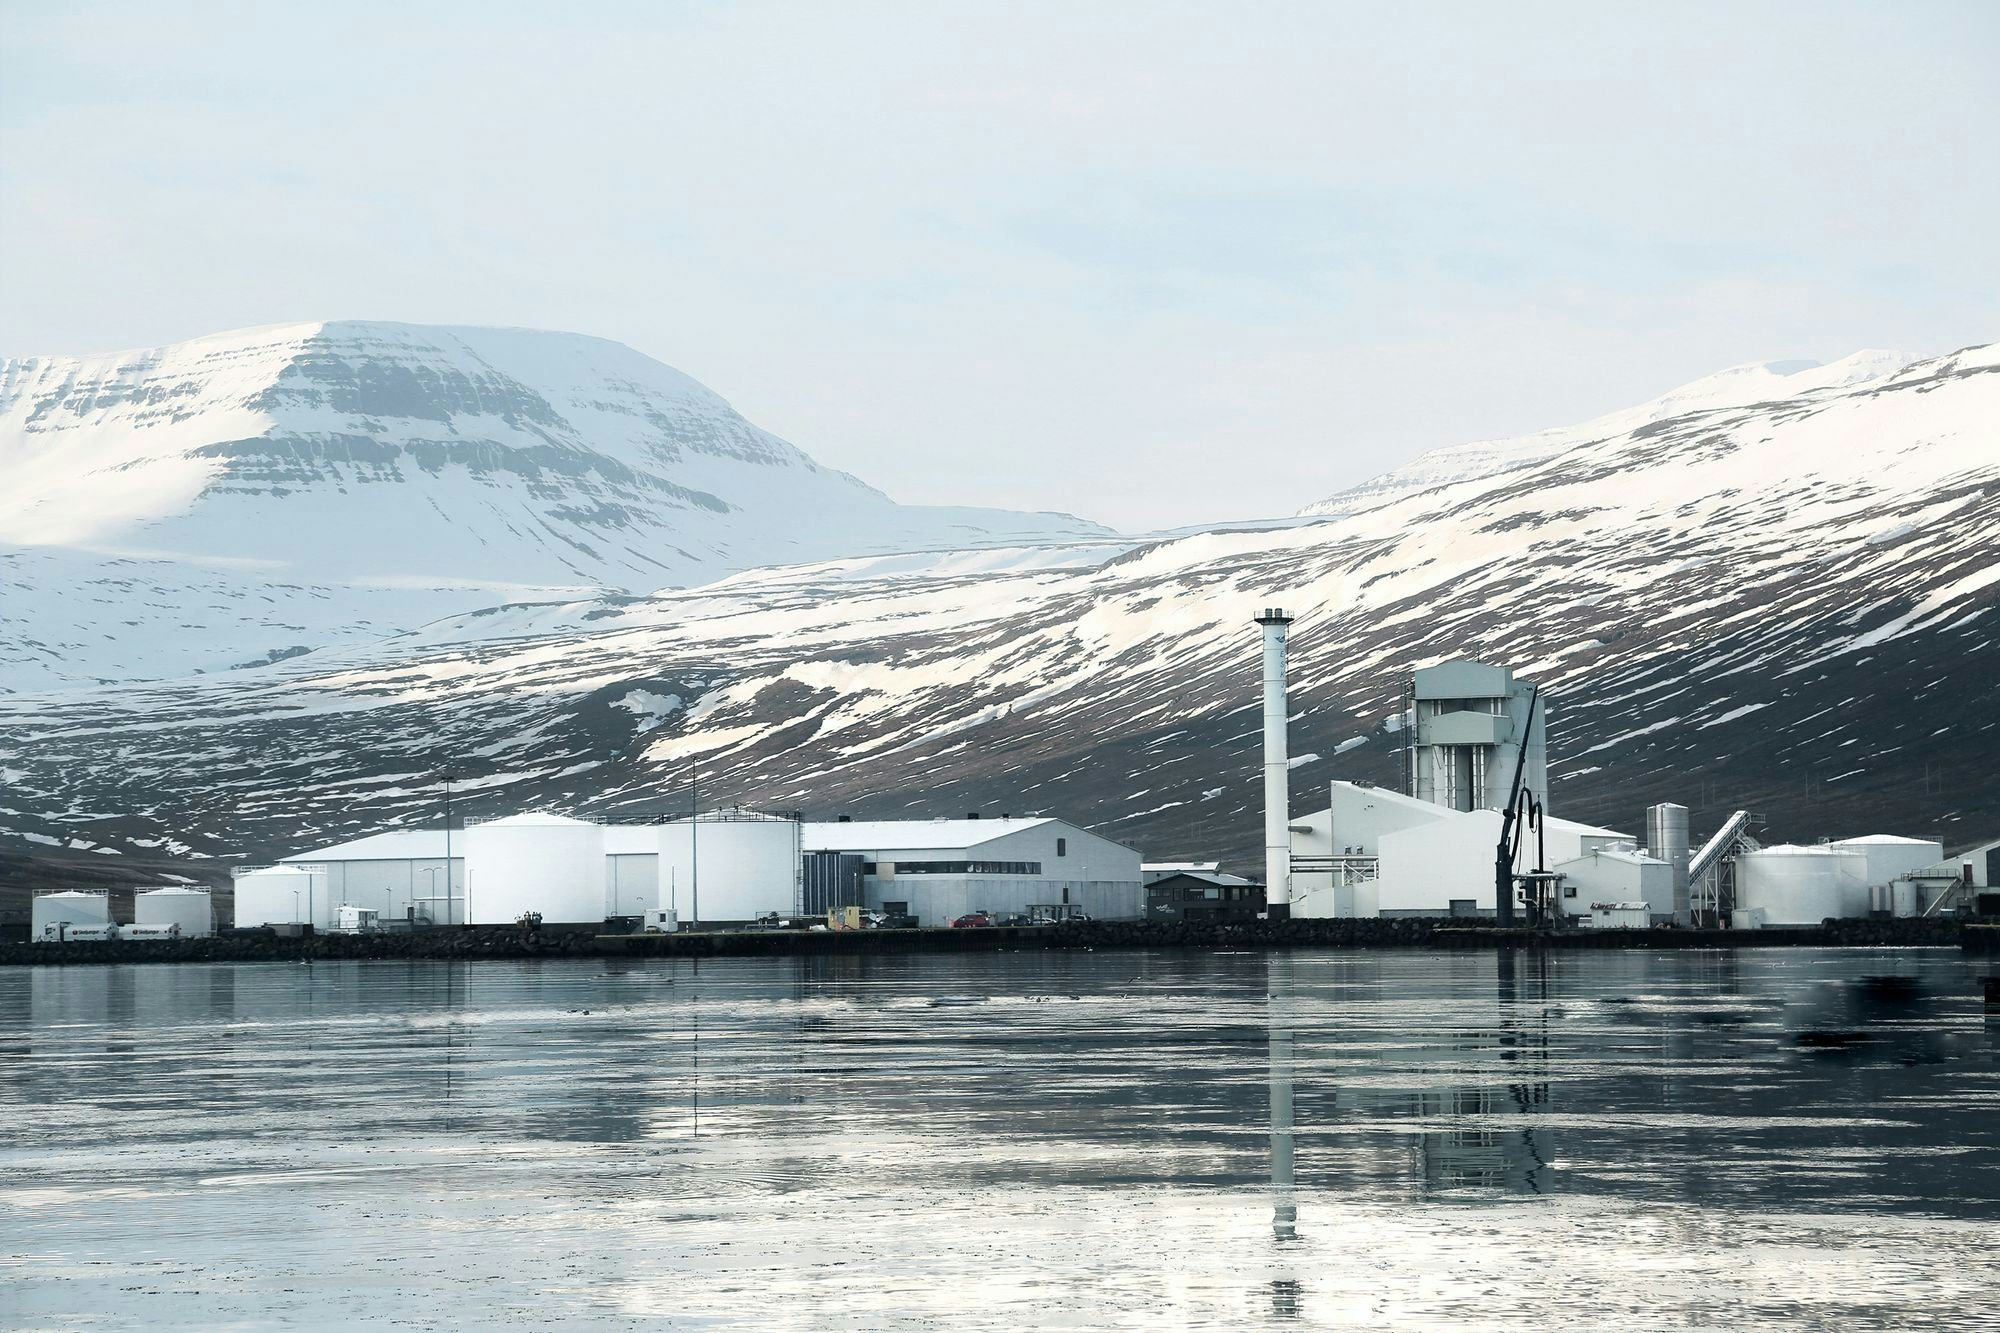 A factory in a port area, white buildings - the sea in the foreground, snow covered mountains in the background, a cold day